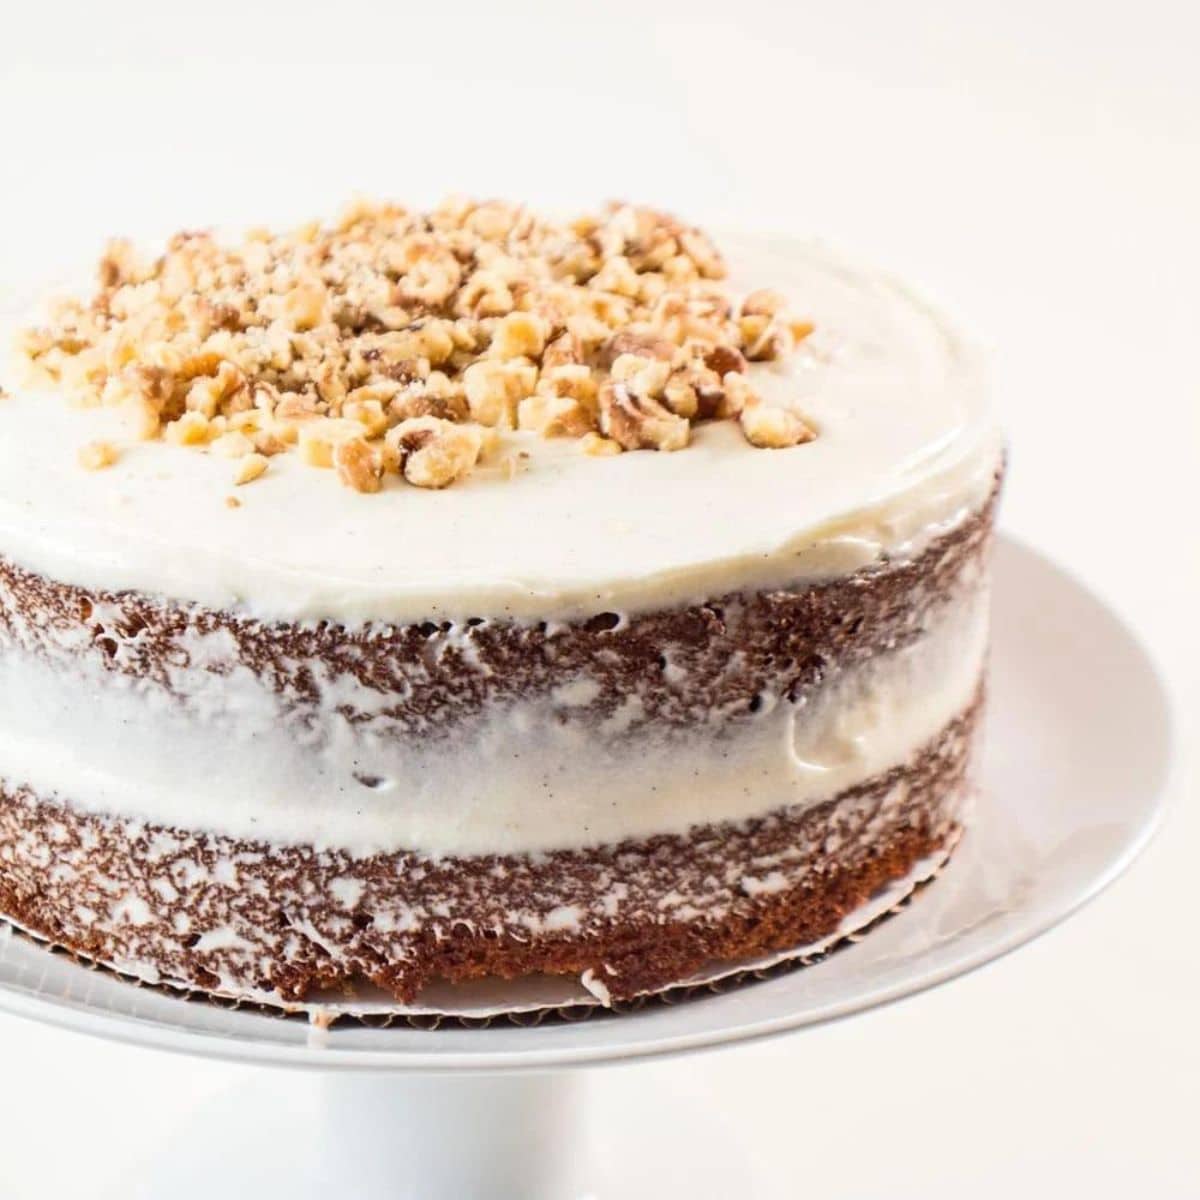 Square image of carrot cake.